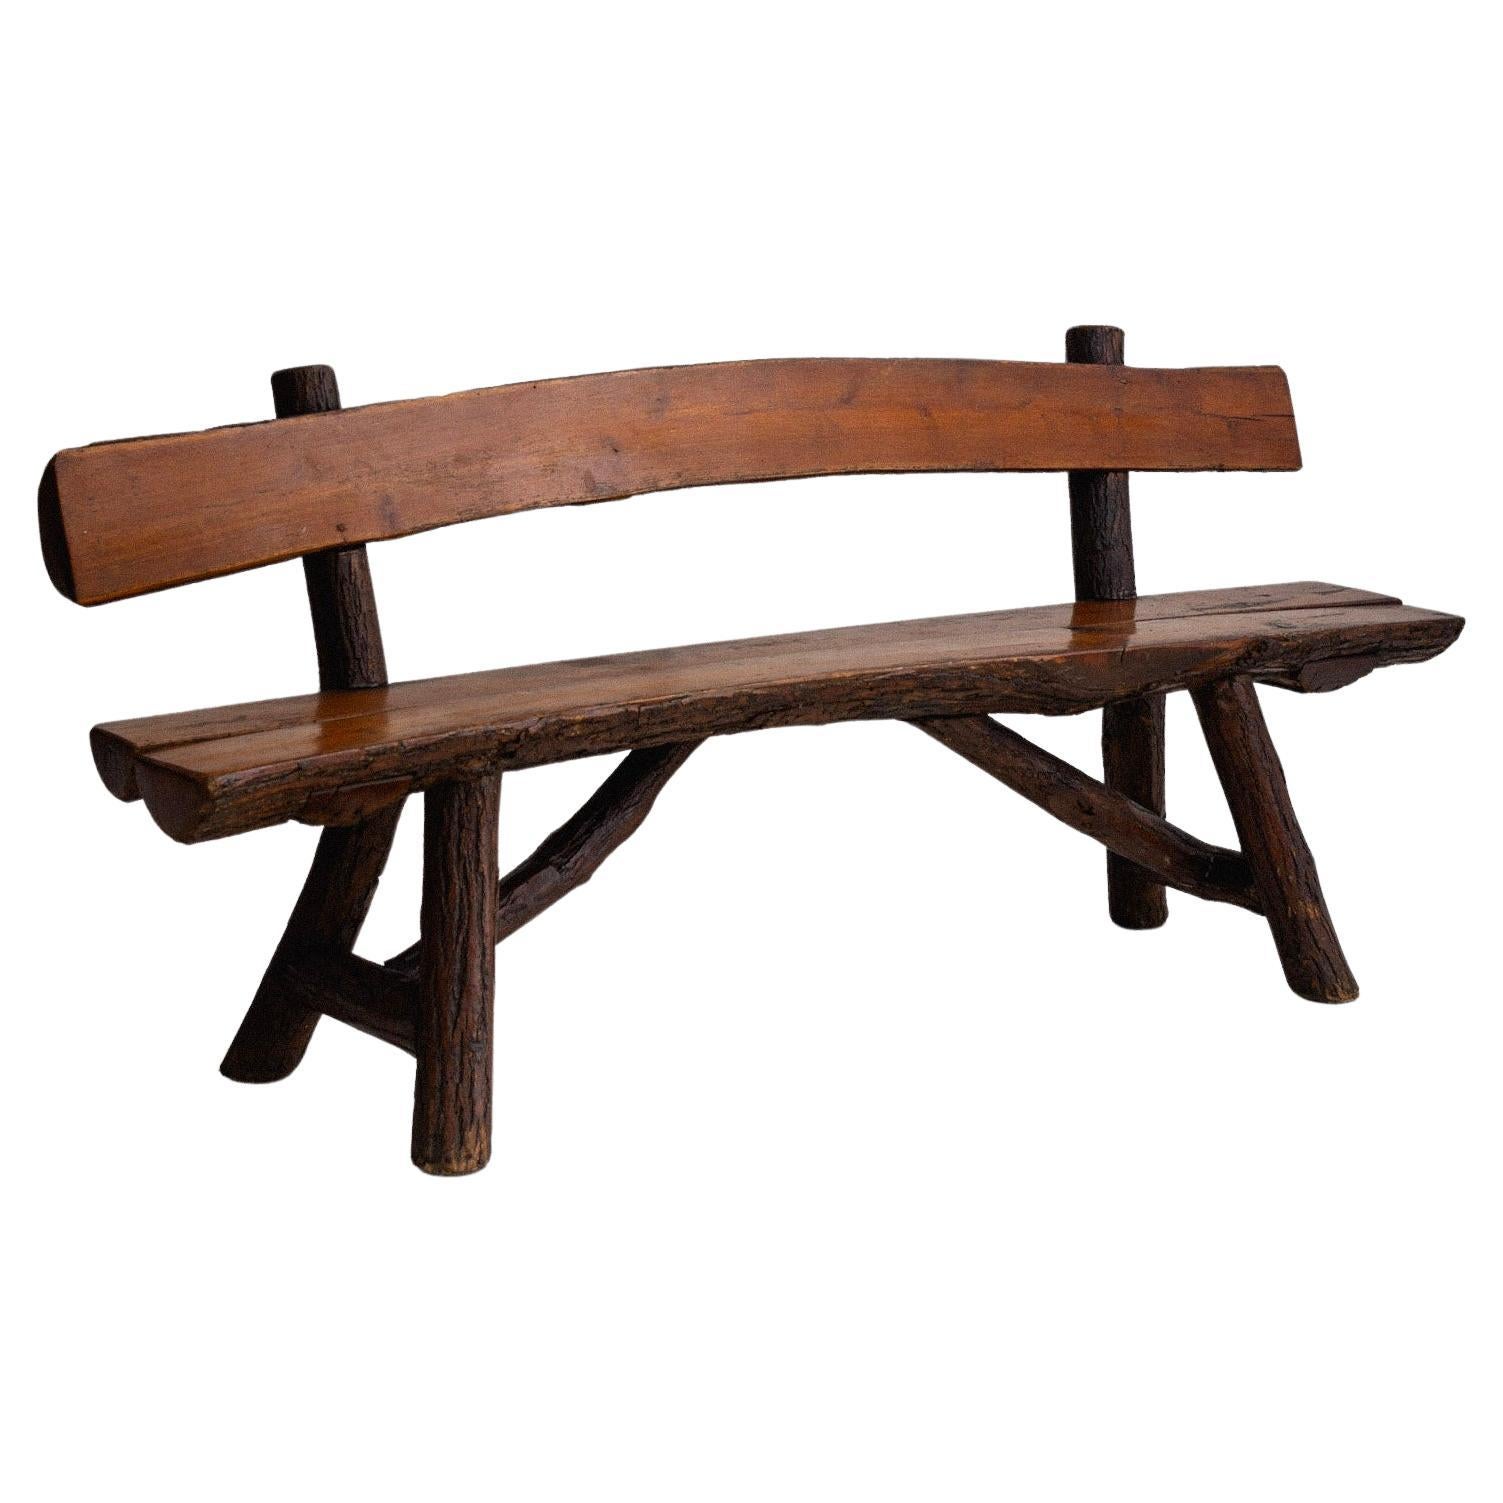 Rustic Live Edge Studio Made European Wood Bench For Sale